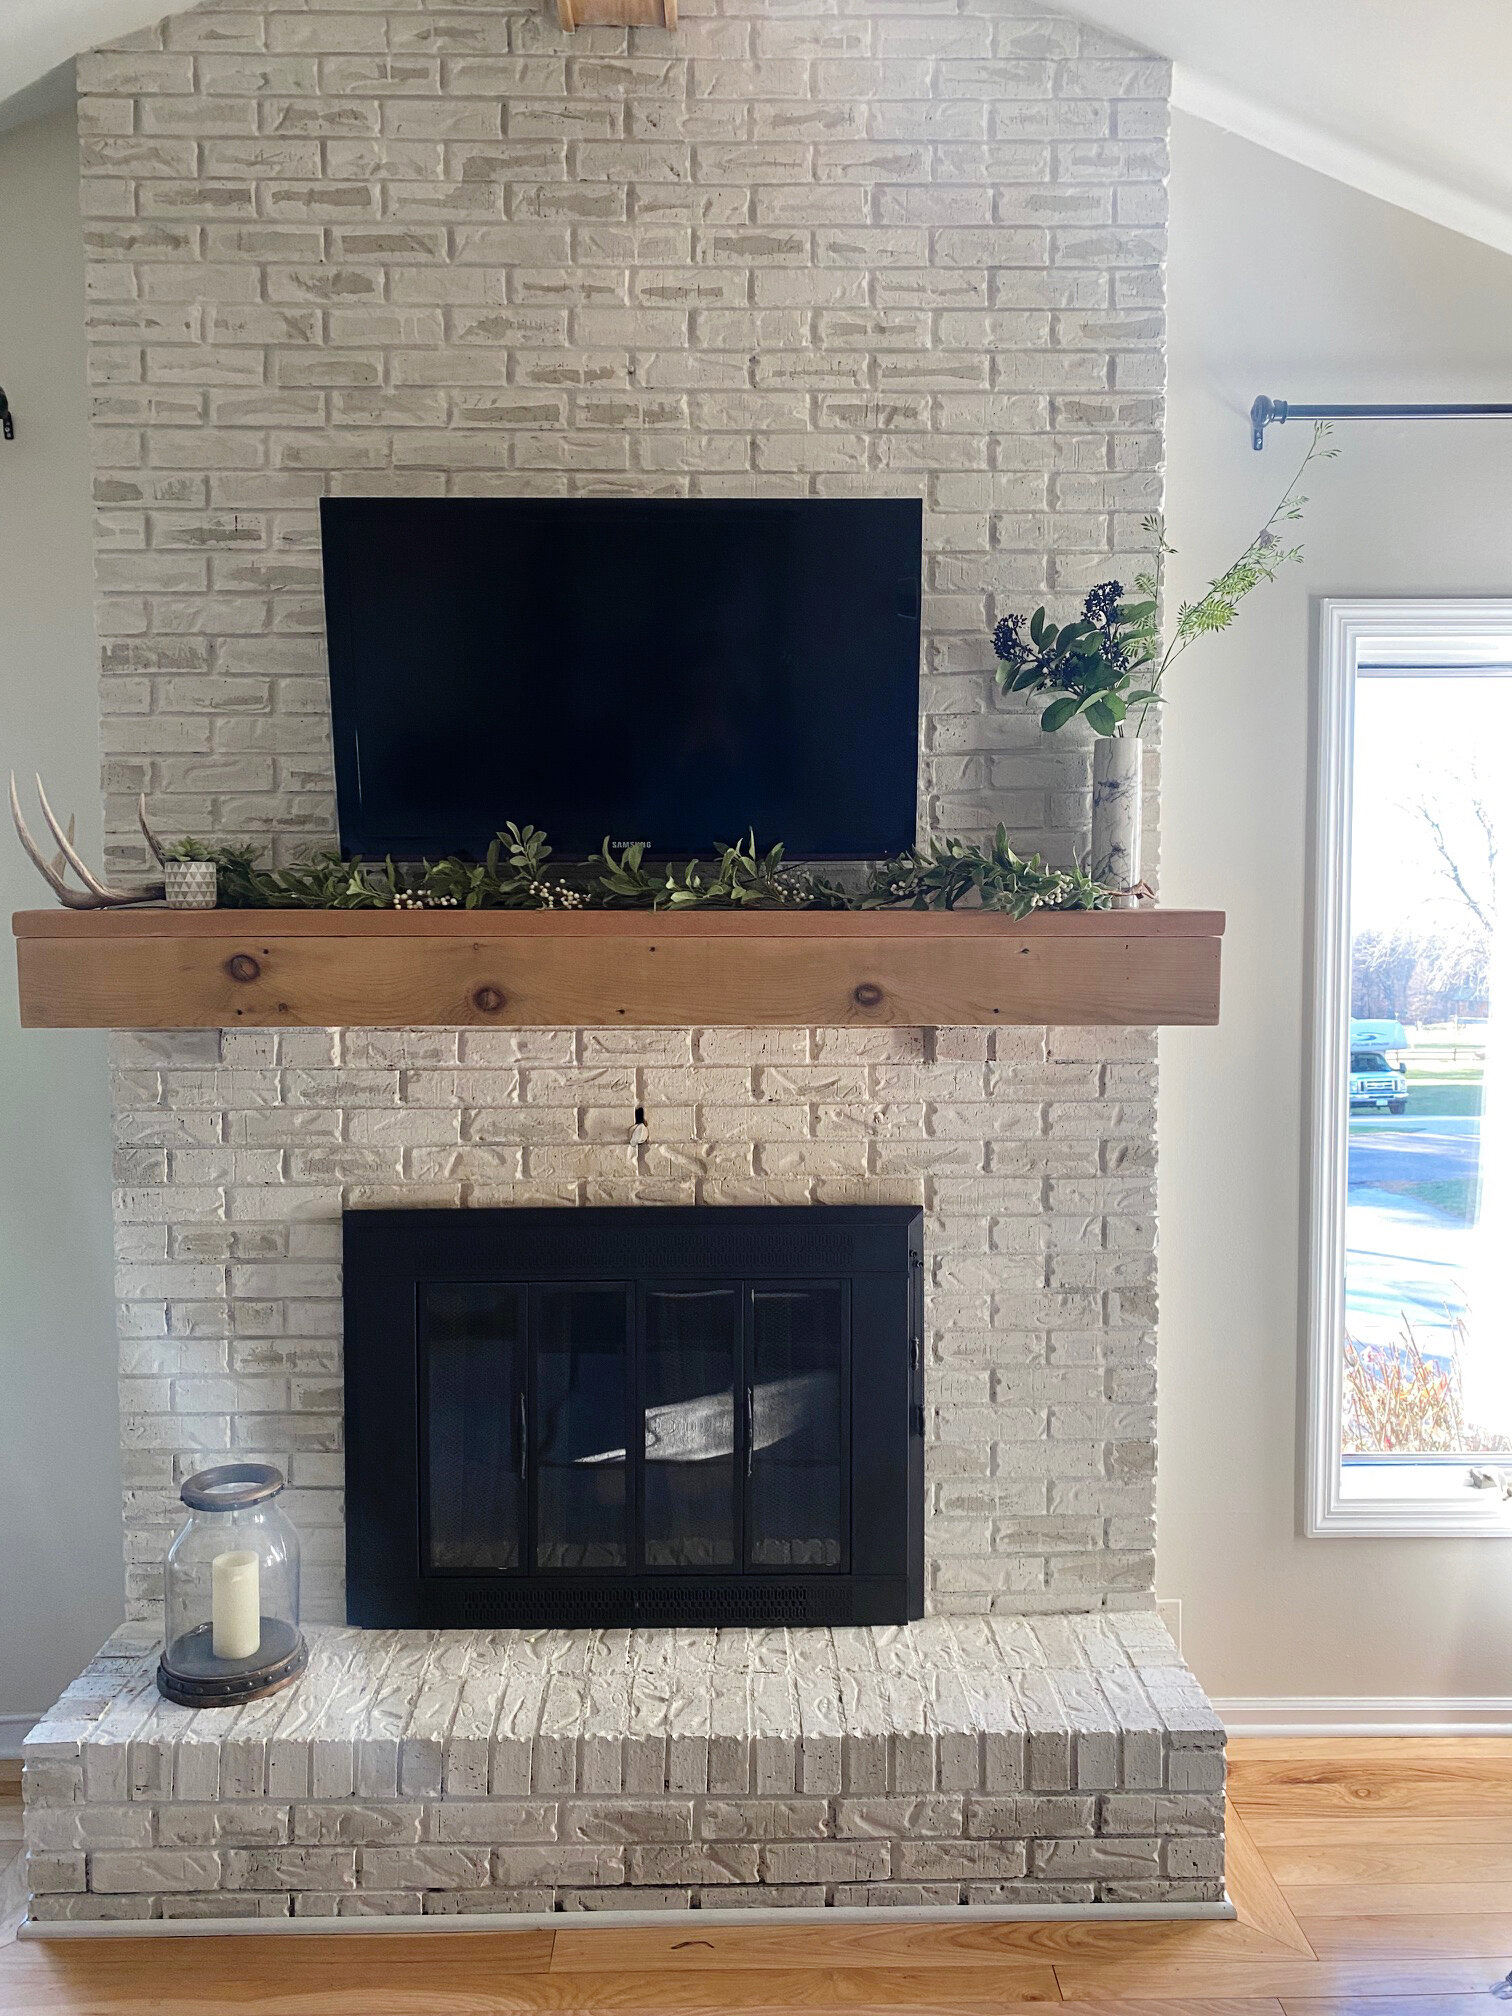 My Painted Brick Fireplace Diy Tutorial, What Type Of Paint Do I Use To A Brick Fireplace